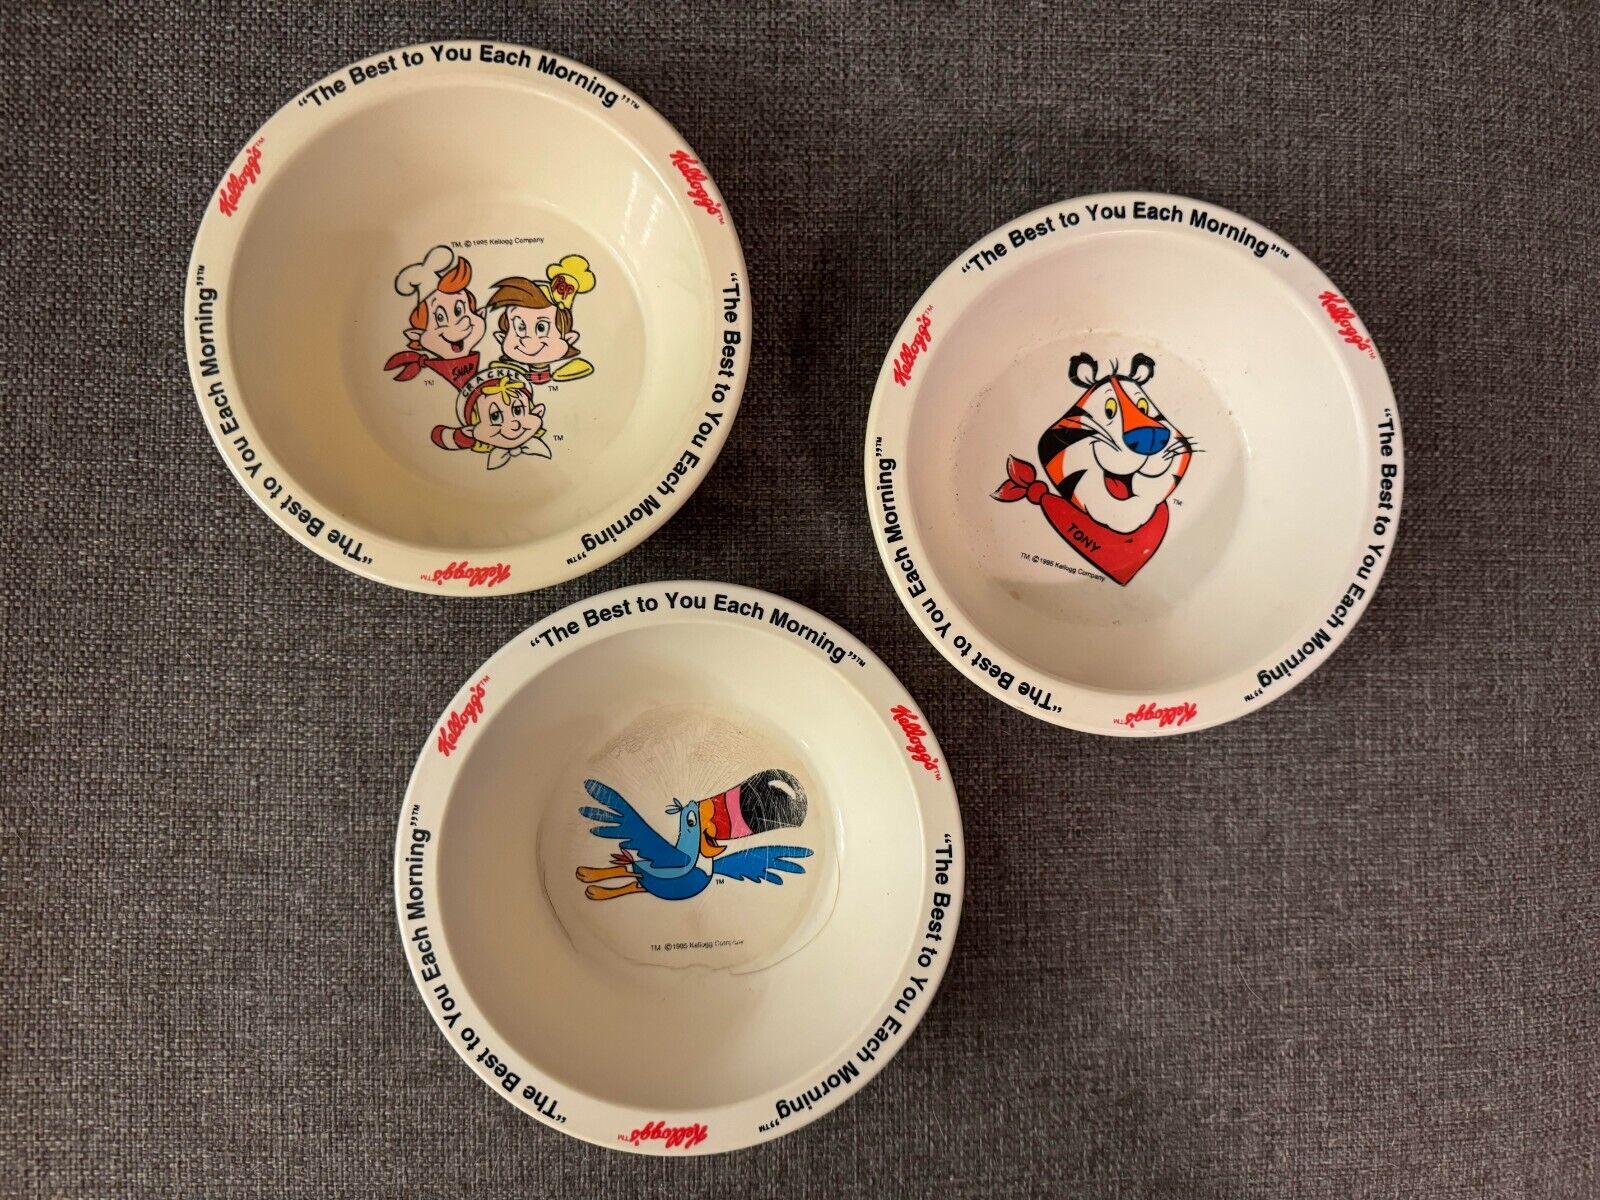 Vintage Kelloggs Cereal Bowls - Set of 3 - Tony the Tiger Fruit Loops